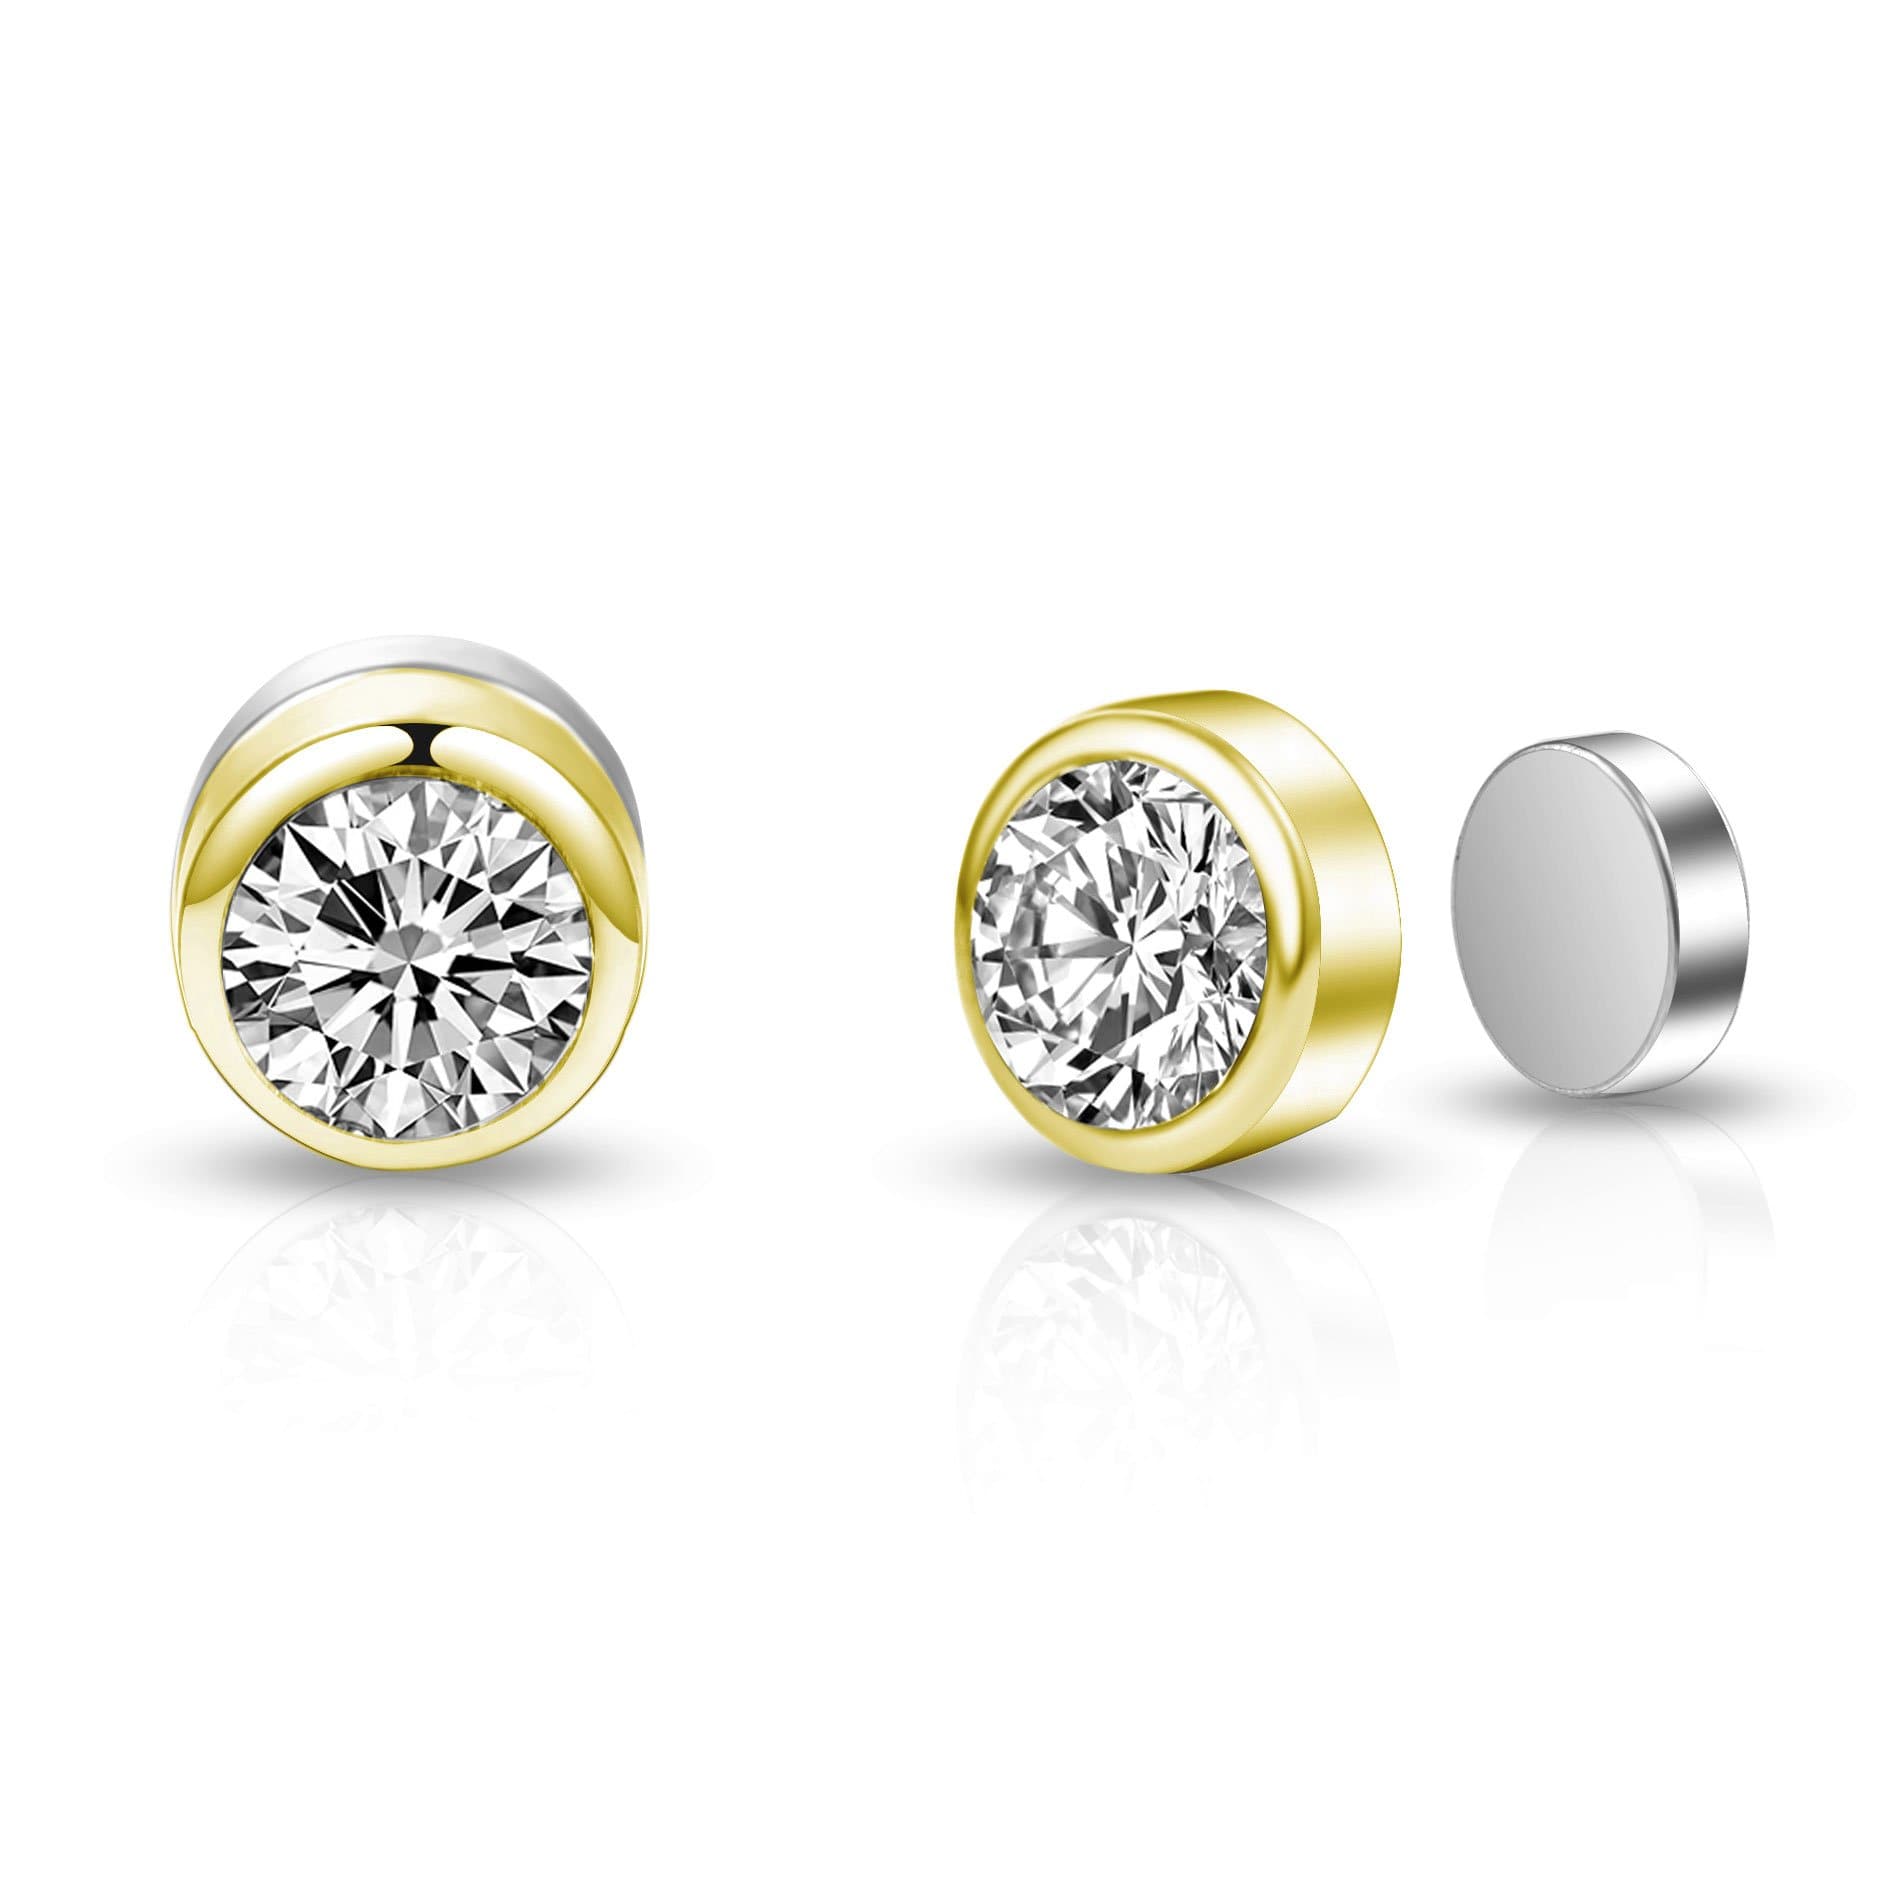 Men's Gold Plated 6mm Magnetic Clip On Earrings Created with Zircondia® Crystals by Philip Jones Jewellery